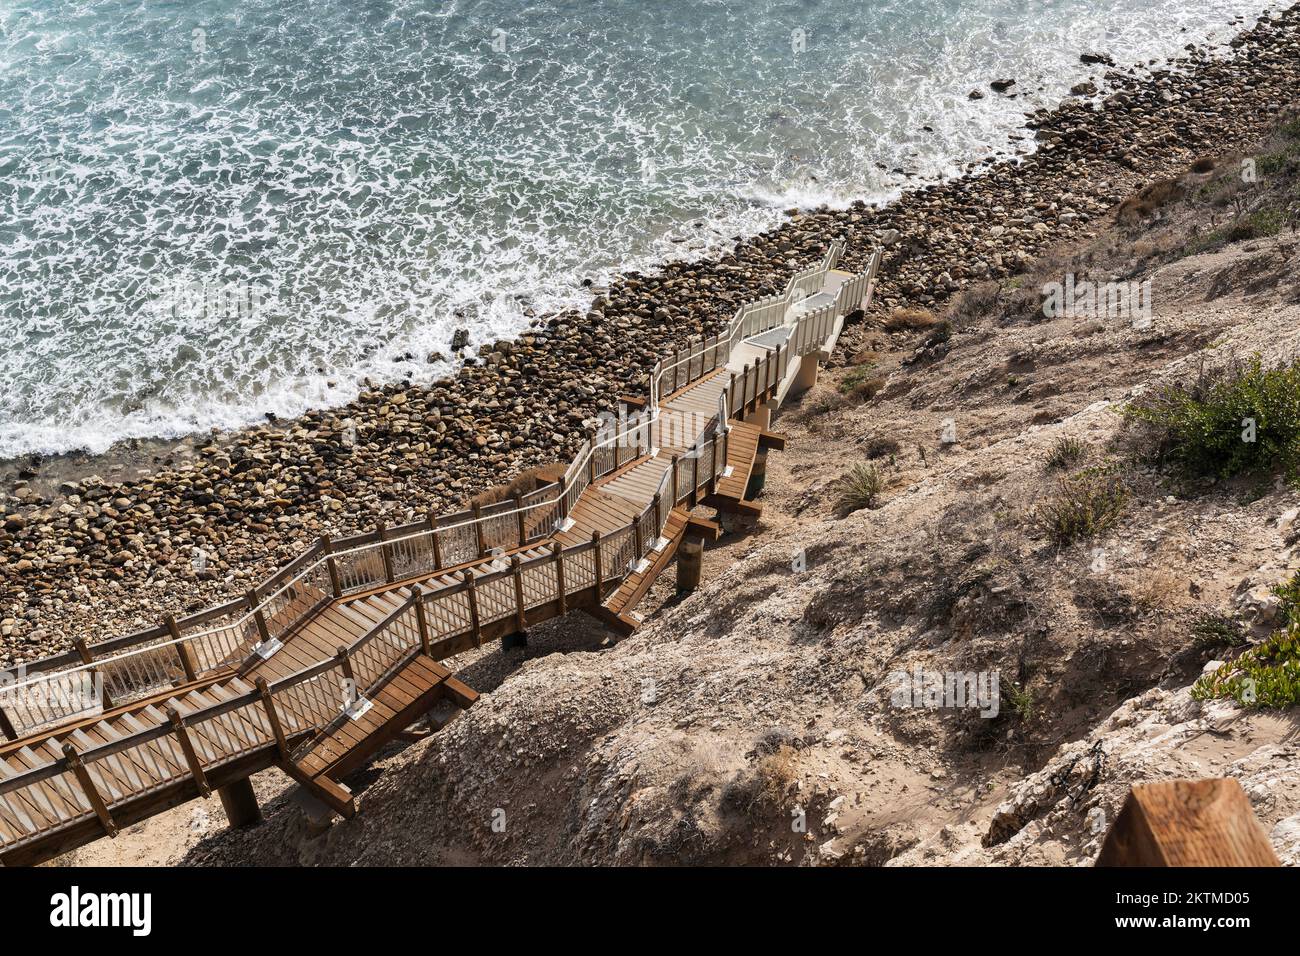 Newly improved stairway leading down to remote Dume Cove beach in Malibu, California. Stock Photo